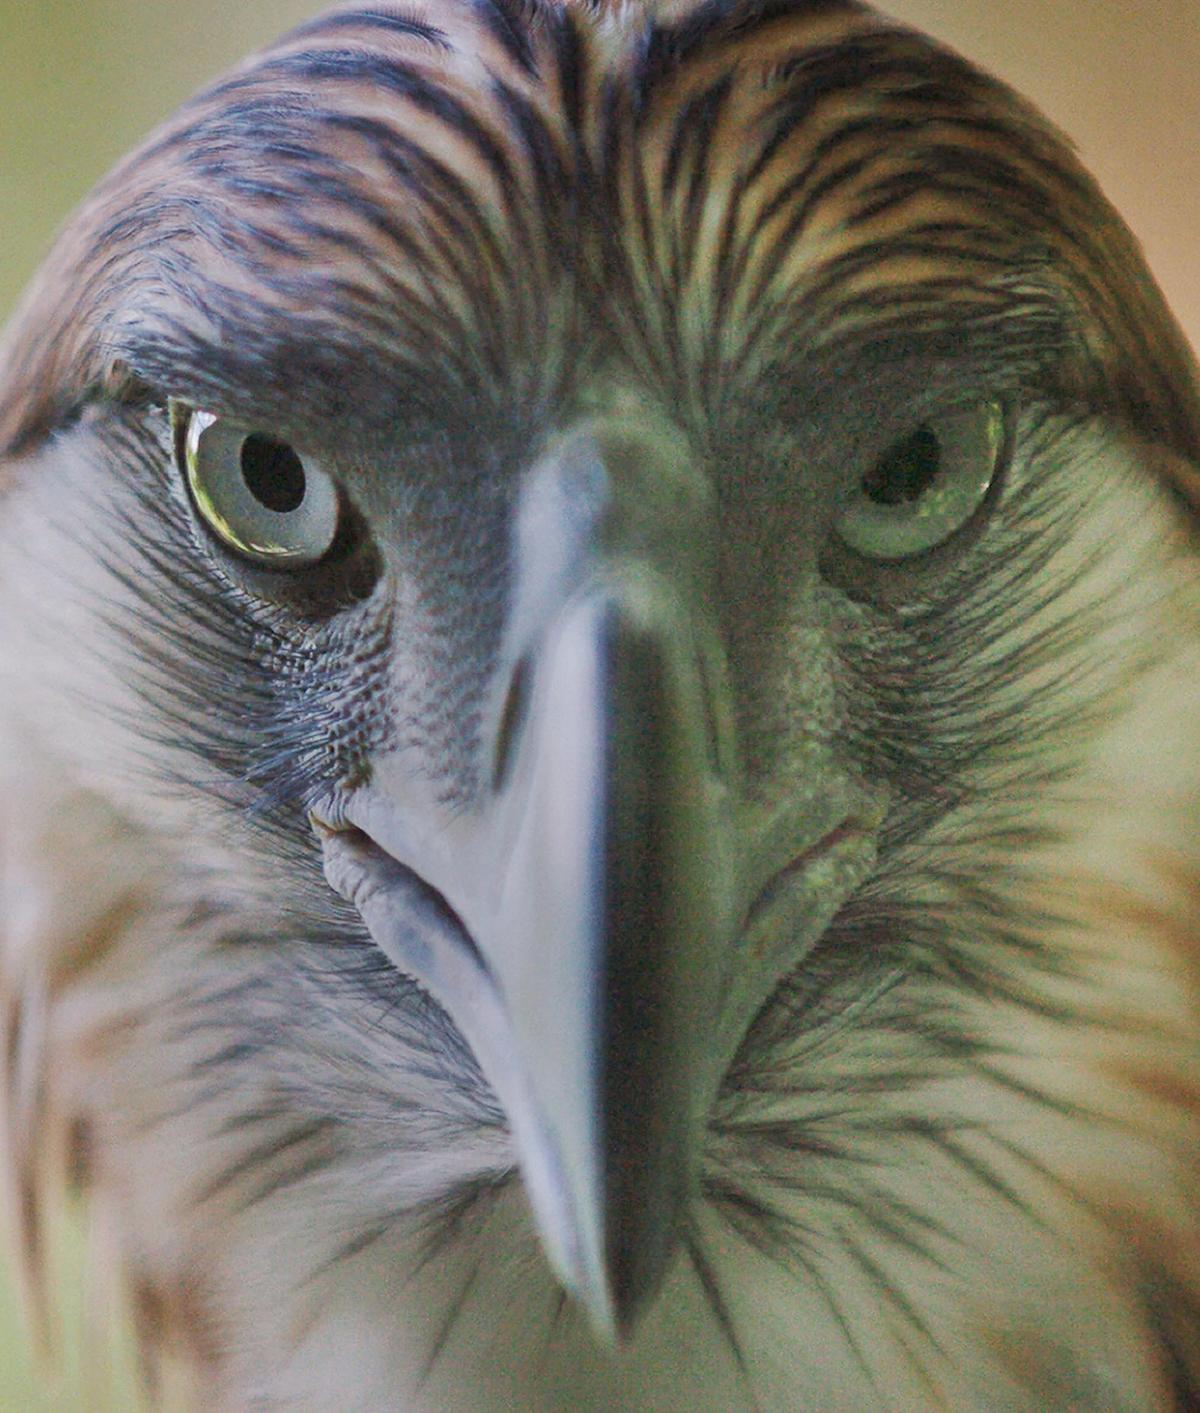 Pag-Asa, (Filipino for hope) the 12-year-old rare Philippine Eagle cast a striking look from his cage at the Philippine Eagle Center in Davao City, located in southern Mindanao island, on April 23, 2004. (ROMEO GACAD/AFP via Getty Images)